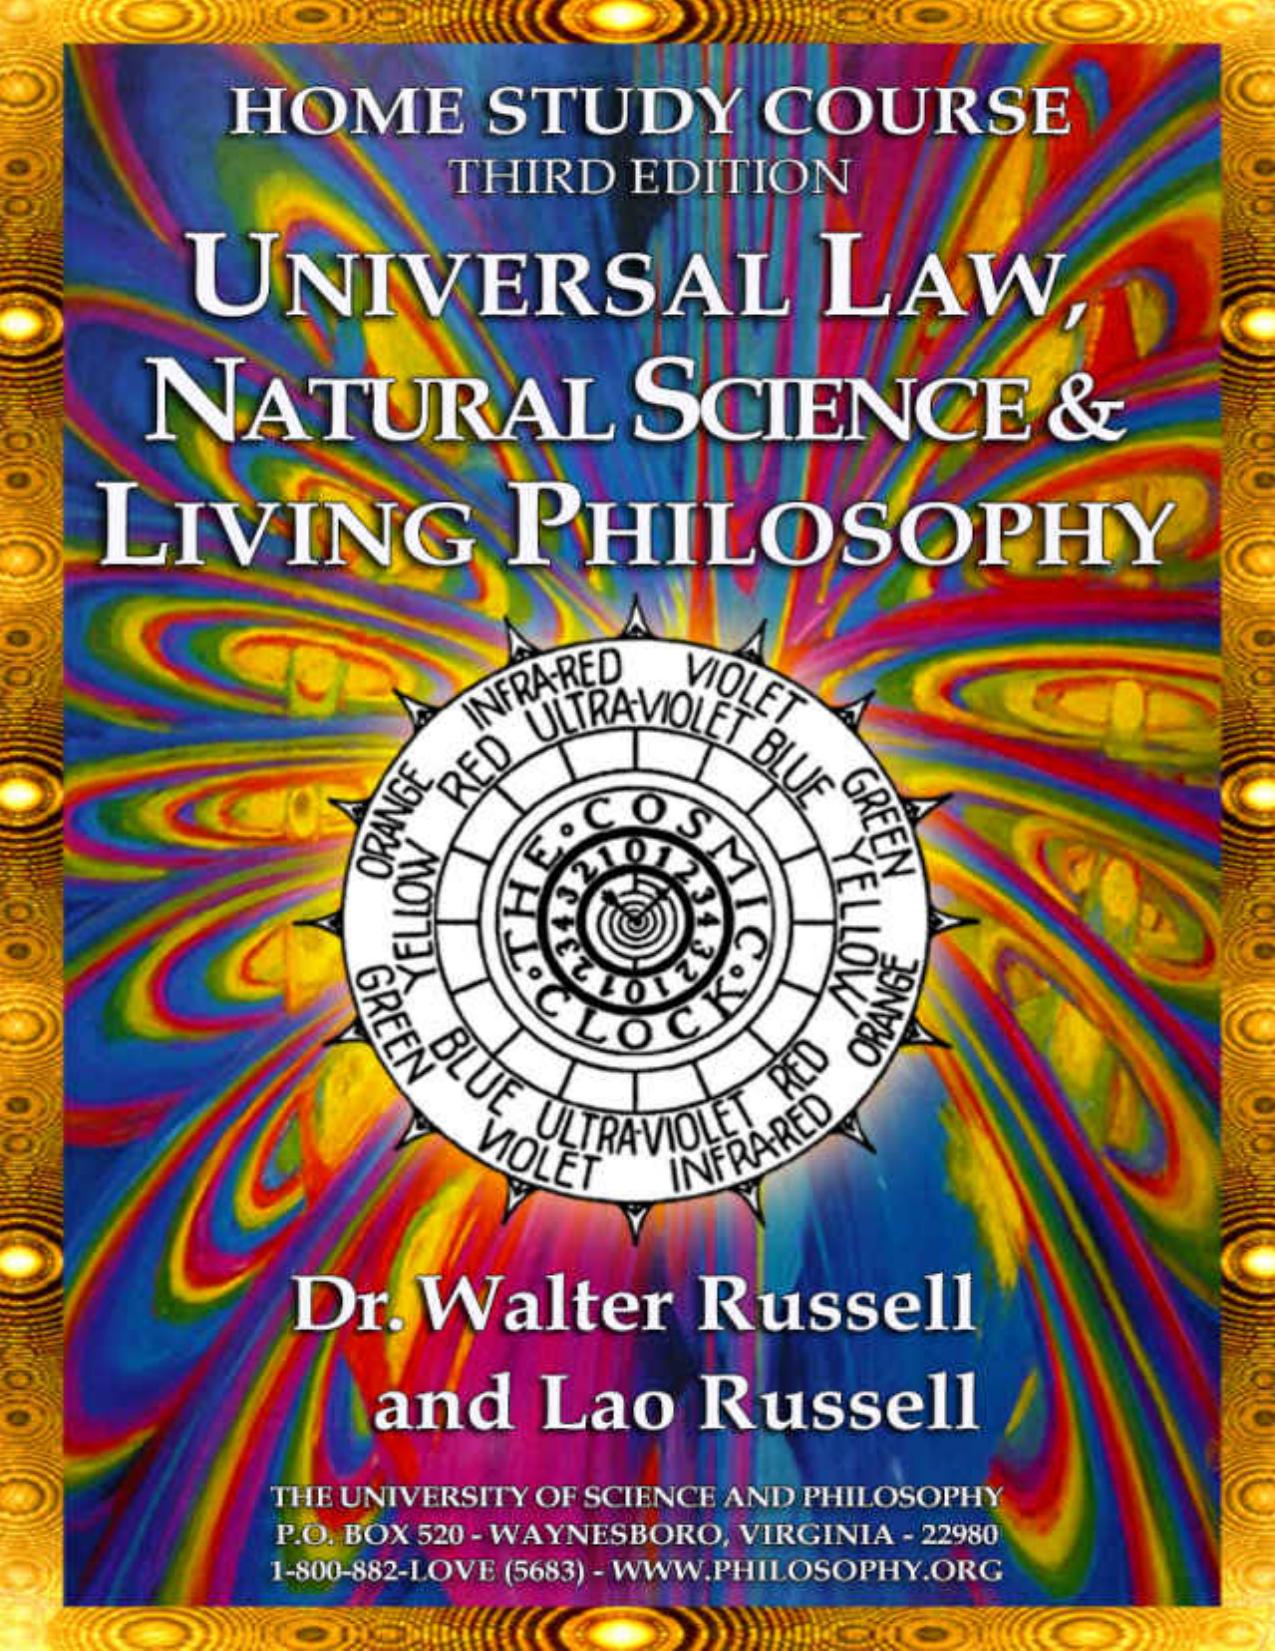 Home Study E-Course - Third Edition: On Universal Law, Natural Science and Living Philosophy